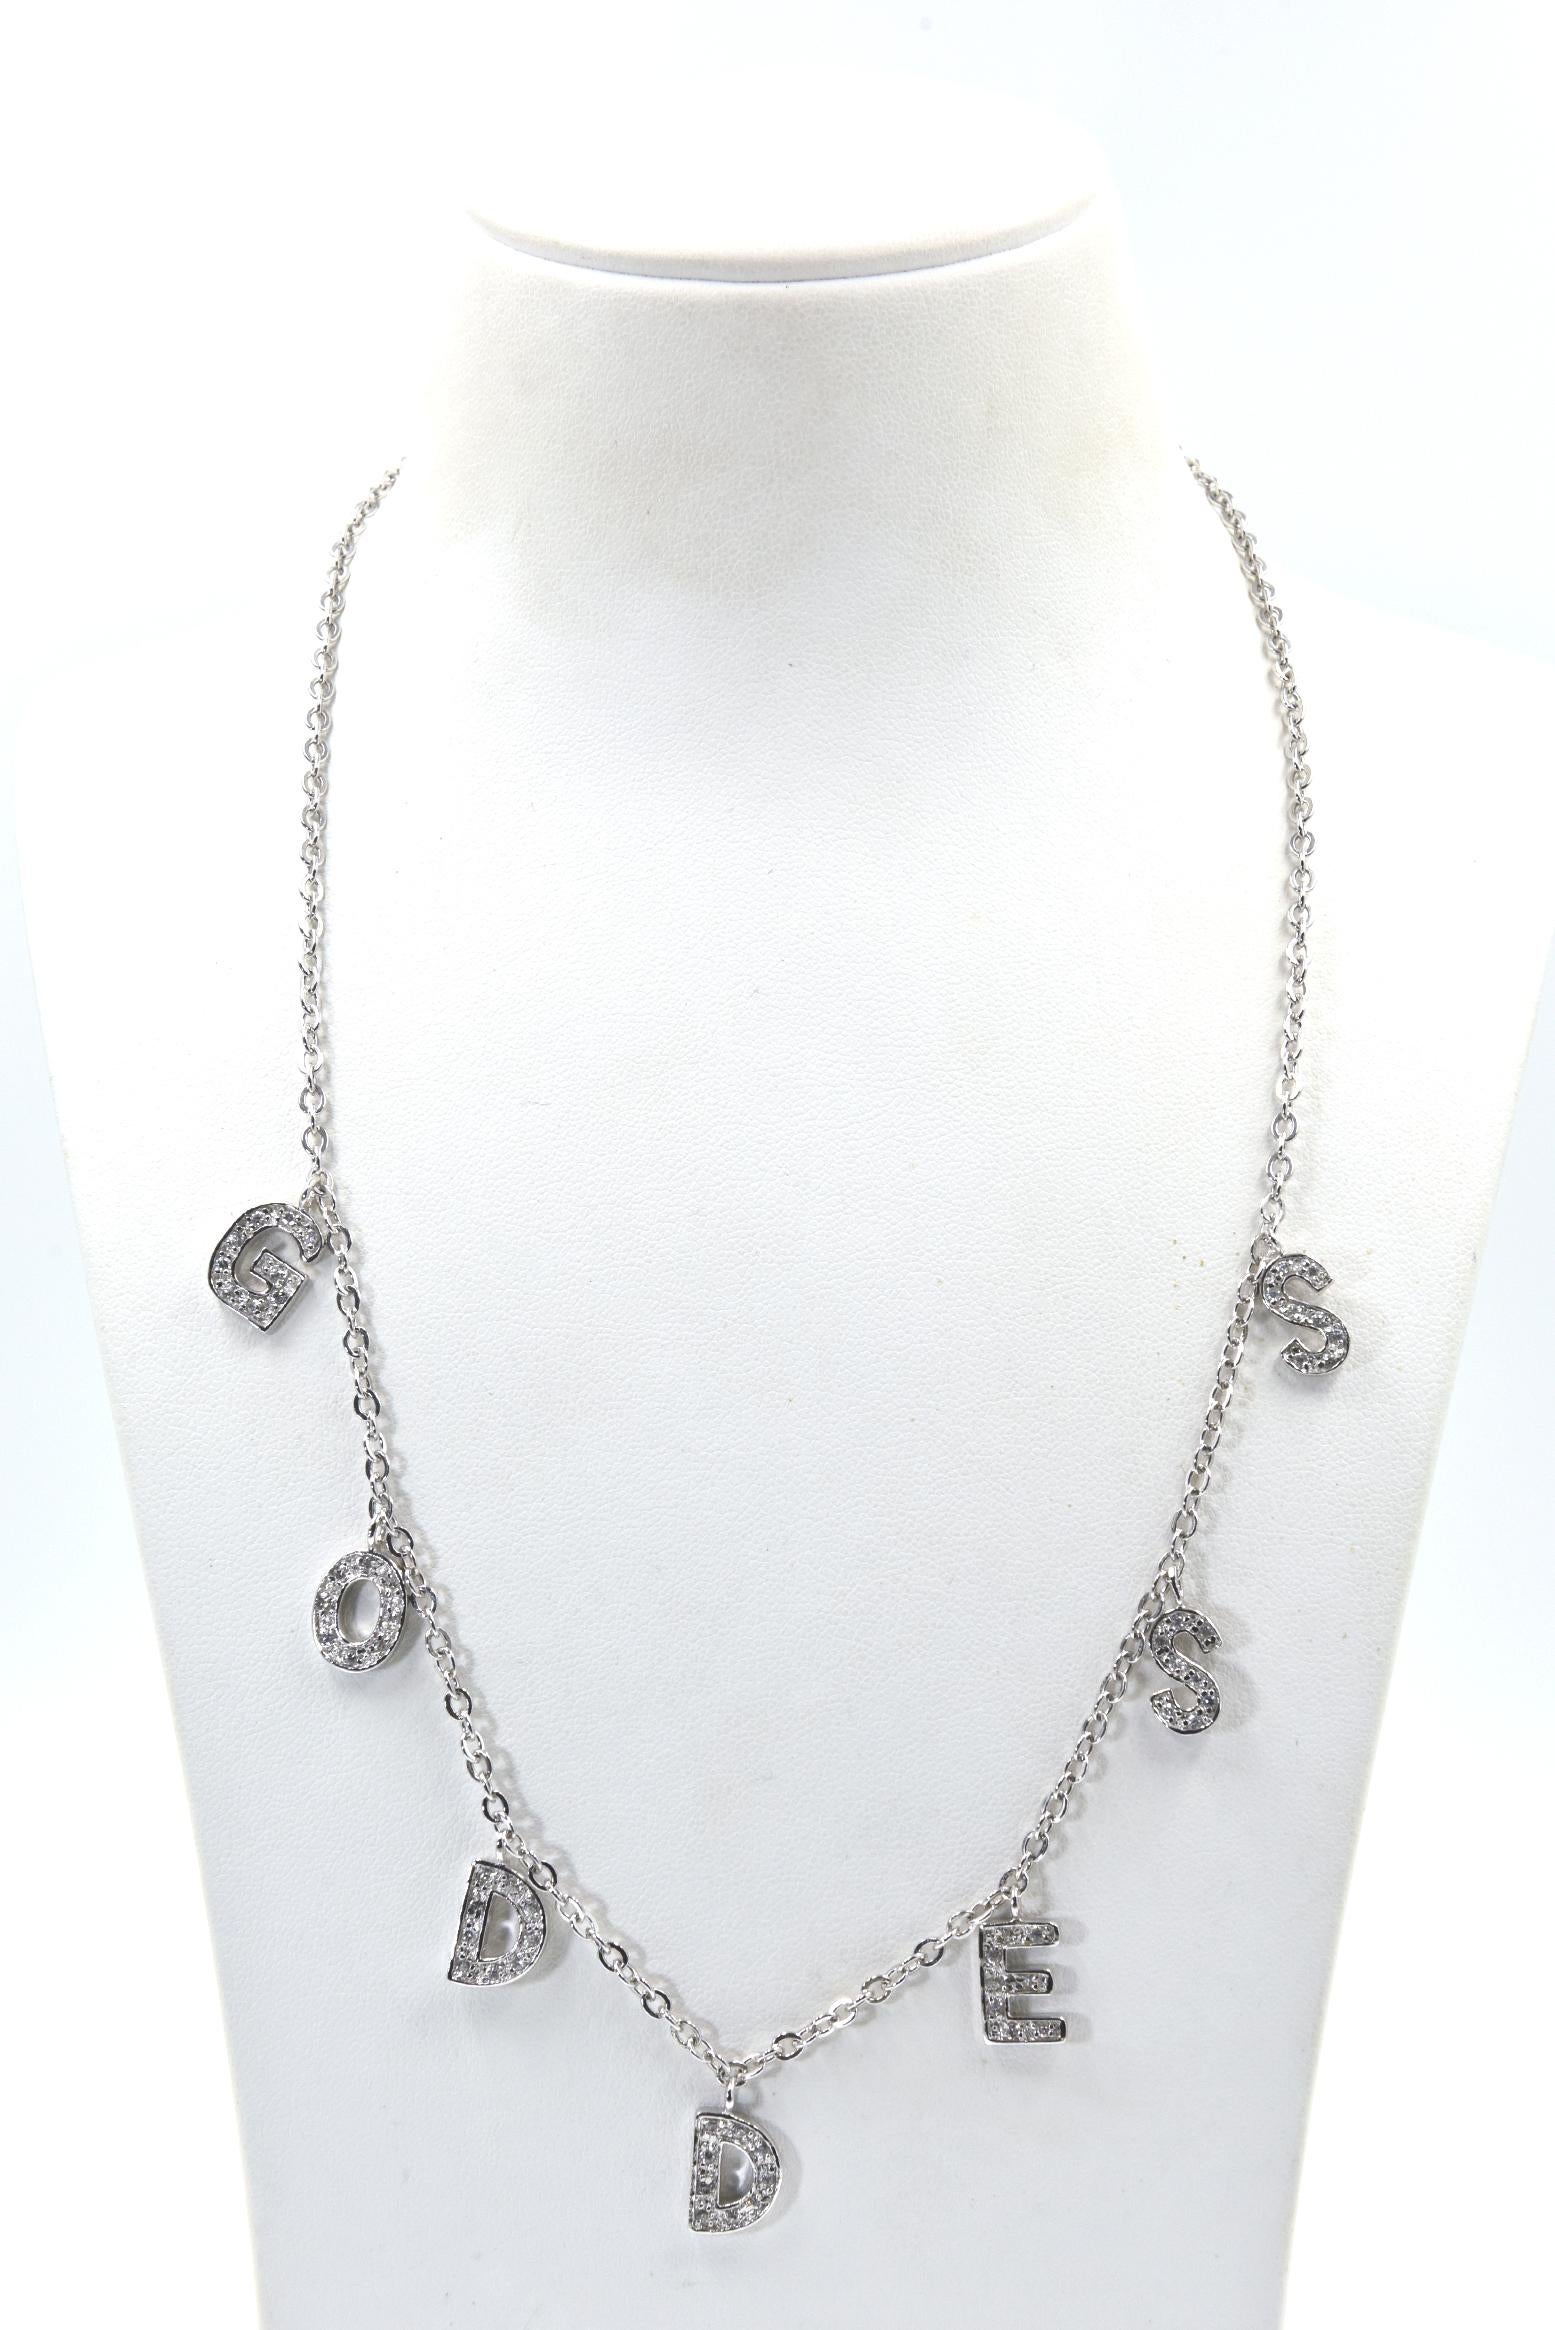 Goddess Sterling and Crystal Necklace For Sale 5